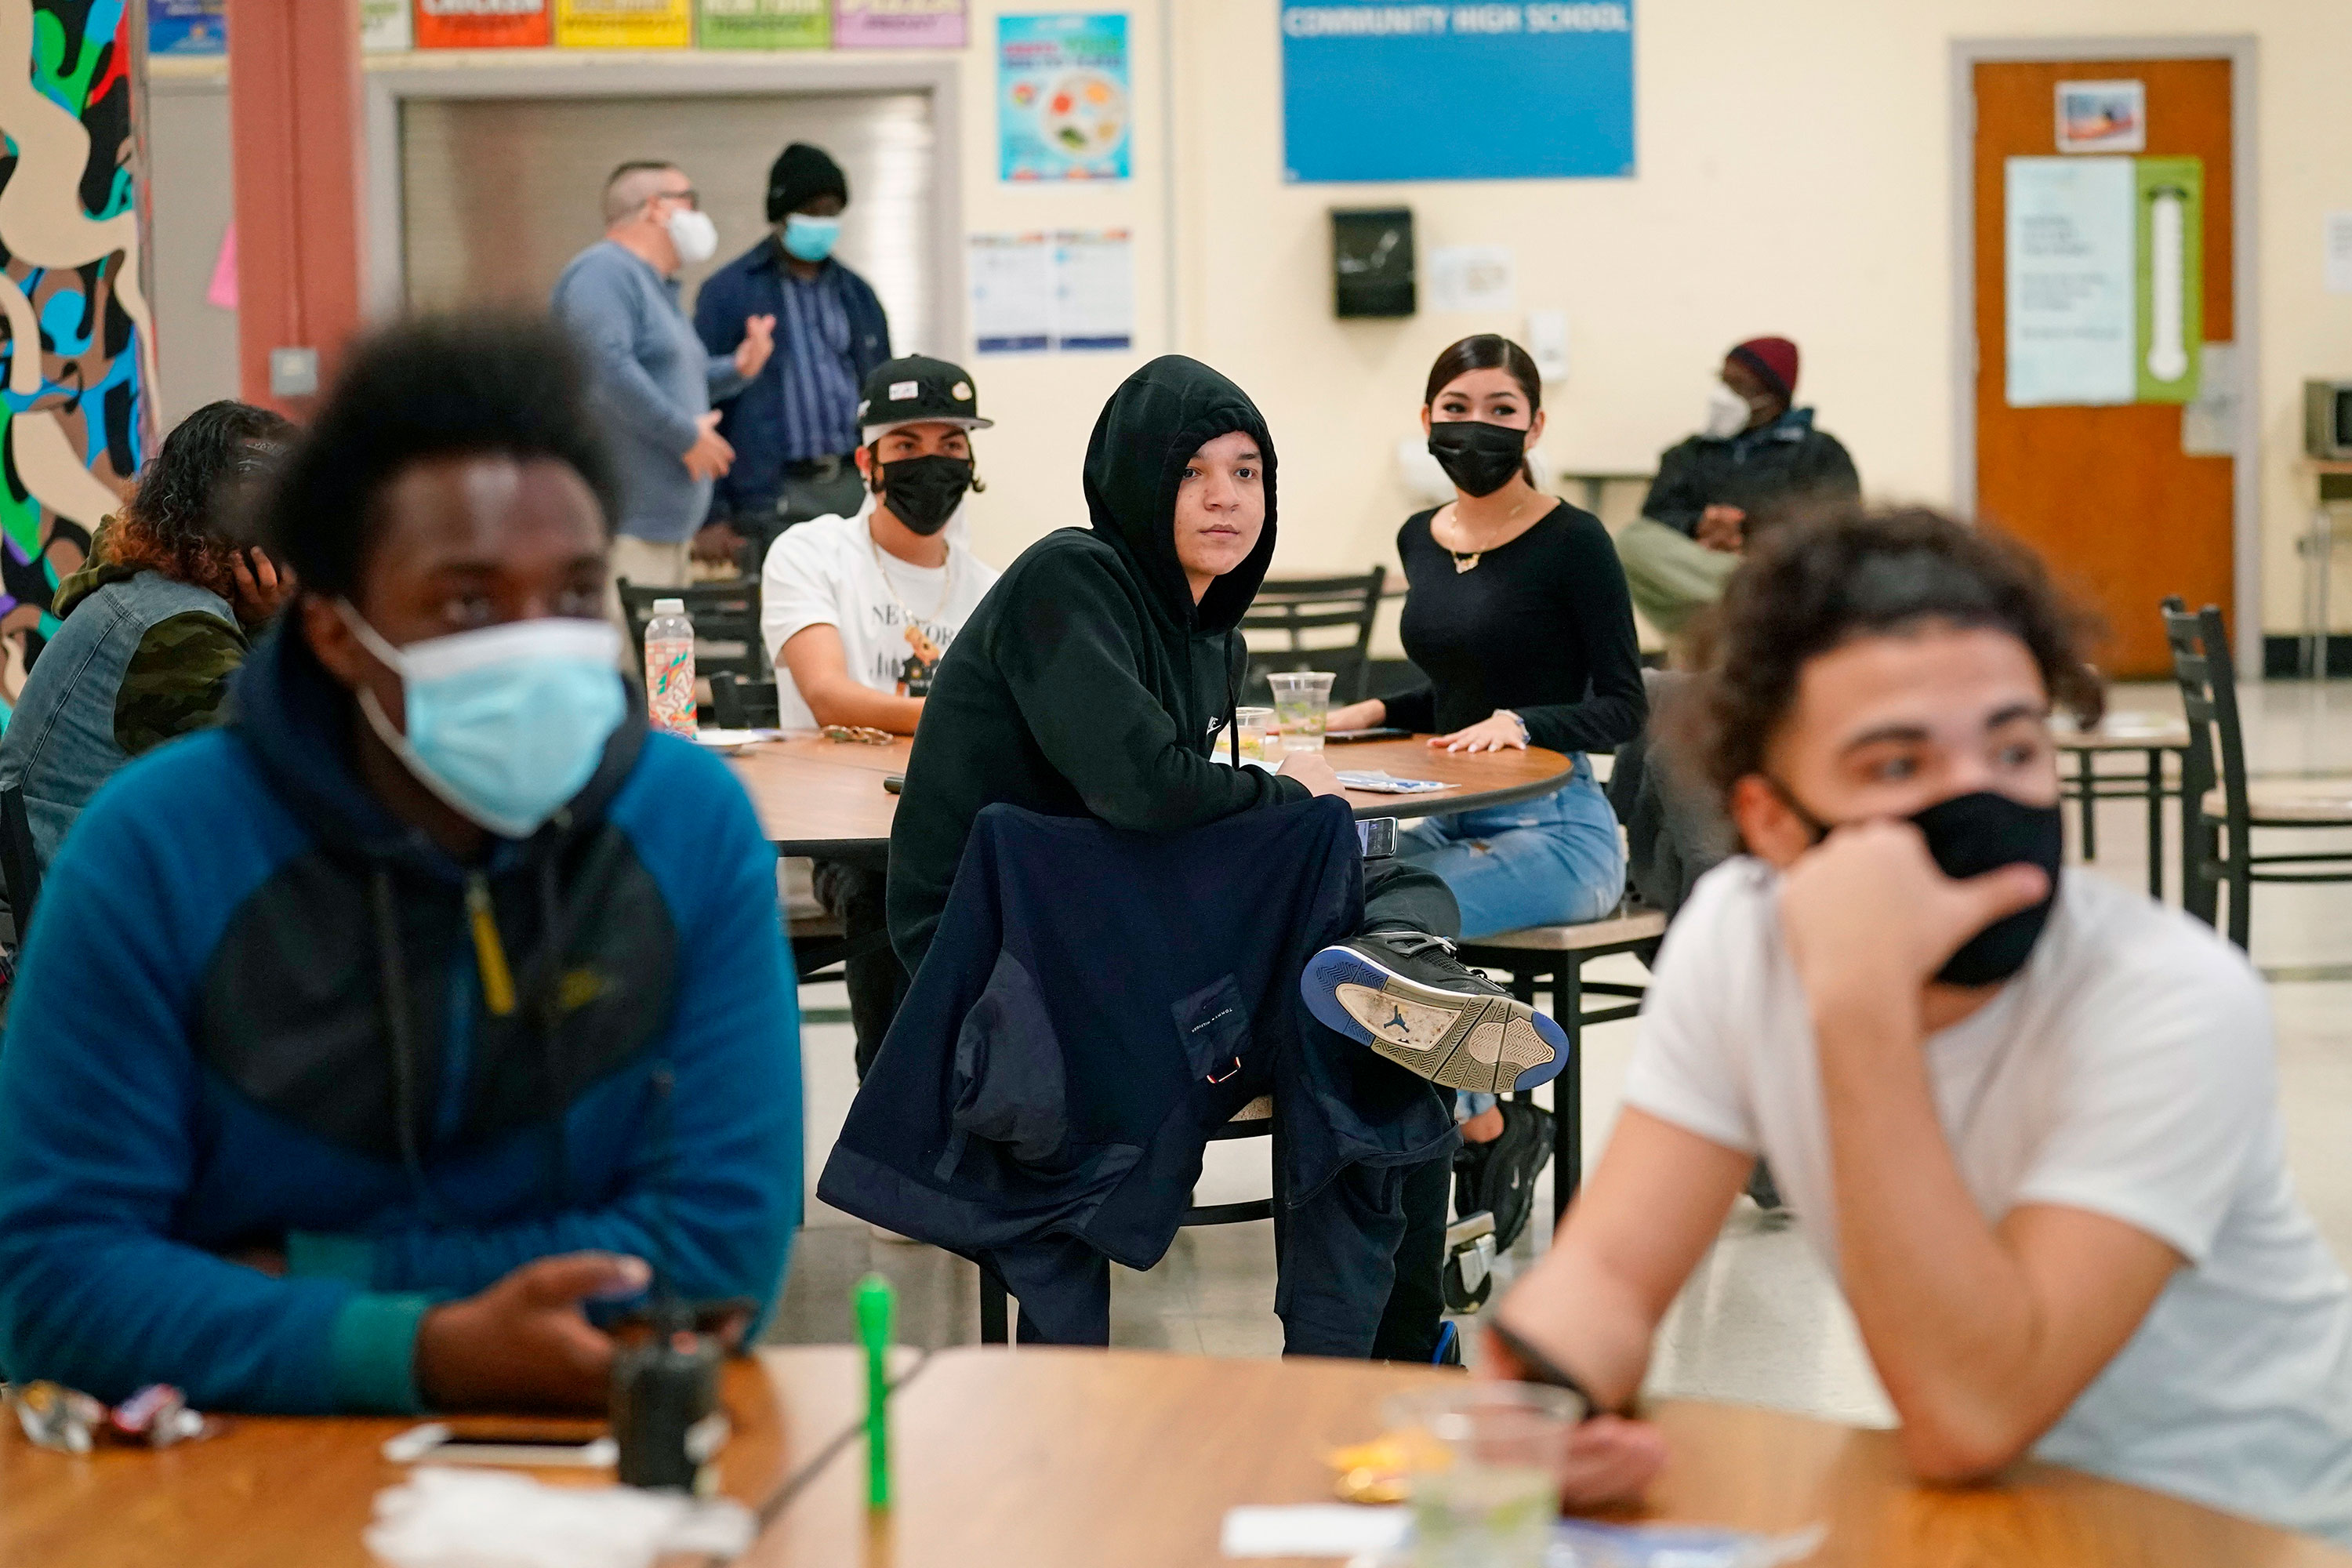 High school students listen to questions posed by their principal in Brooklyn, New York, on October 29.